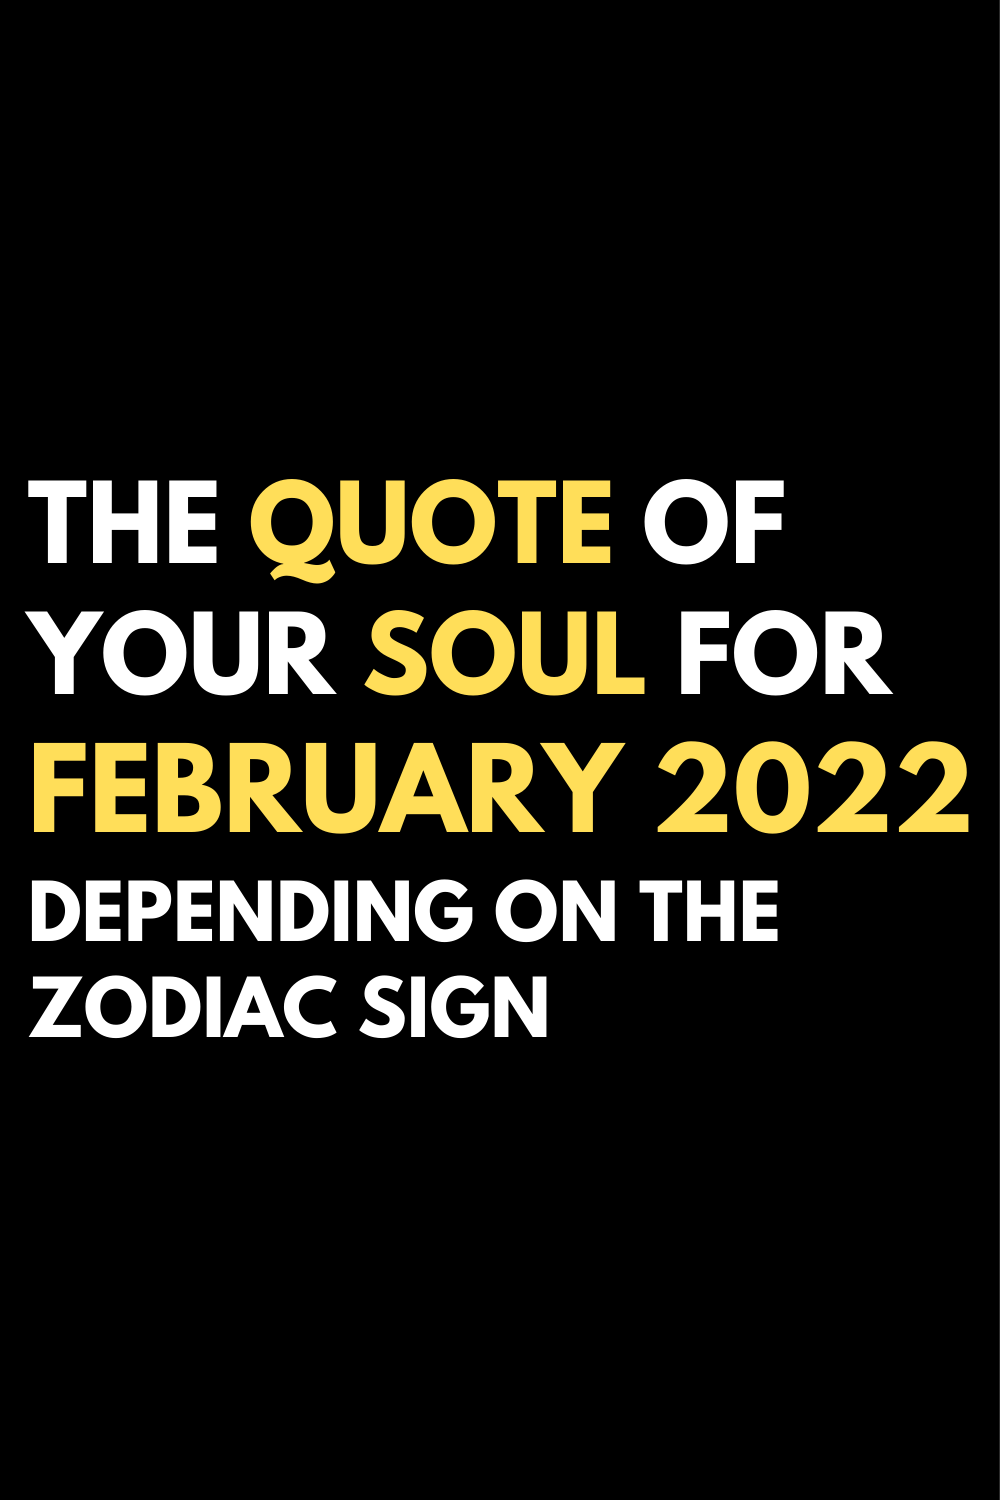 The quote of your soul for February 2022 depending on the zodiac sign